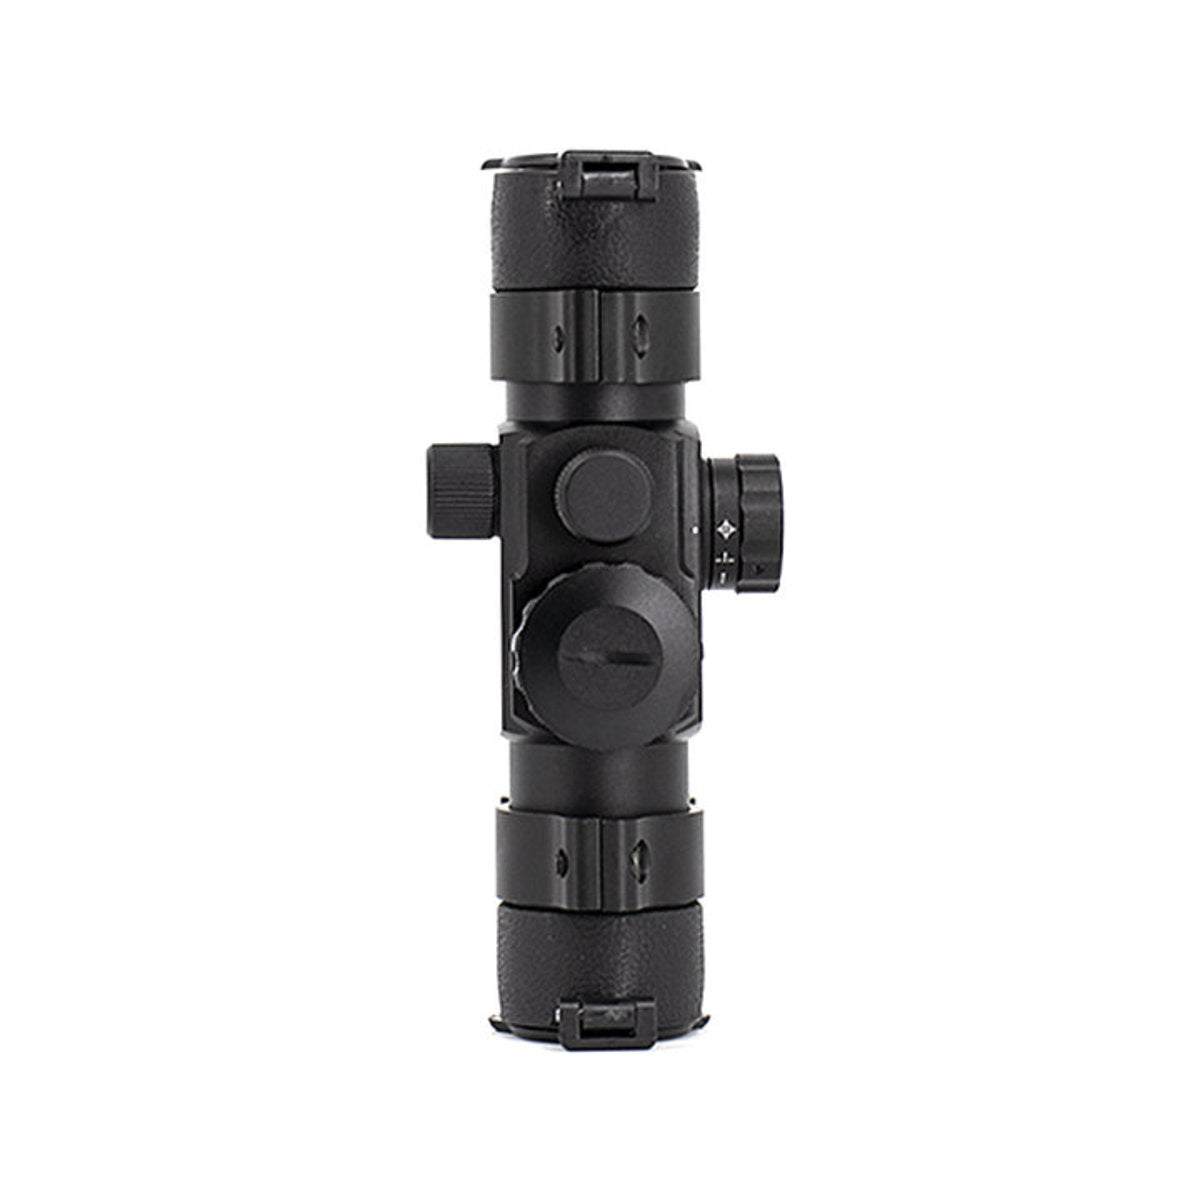 Valken 1x30 Multi-Reticle Red Dot Sight - Eminent Paintball And Airsoft